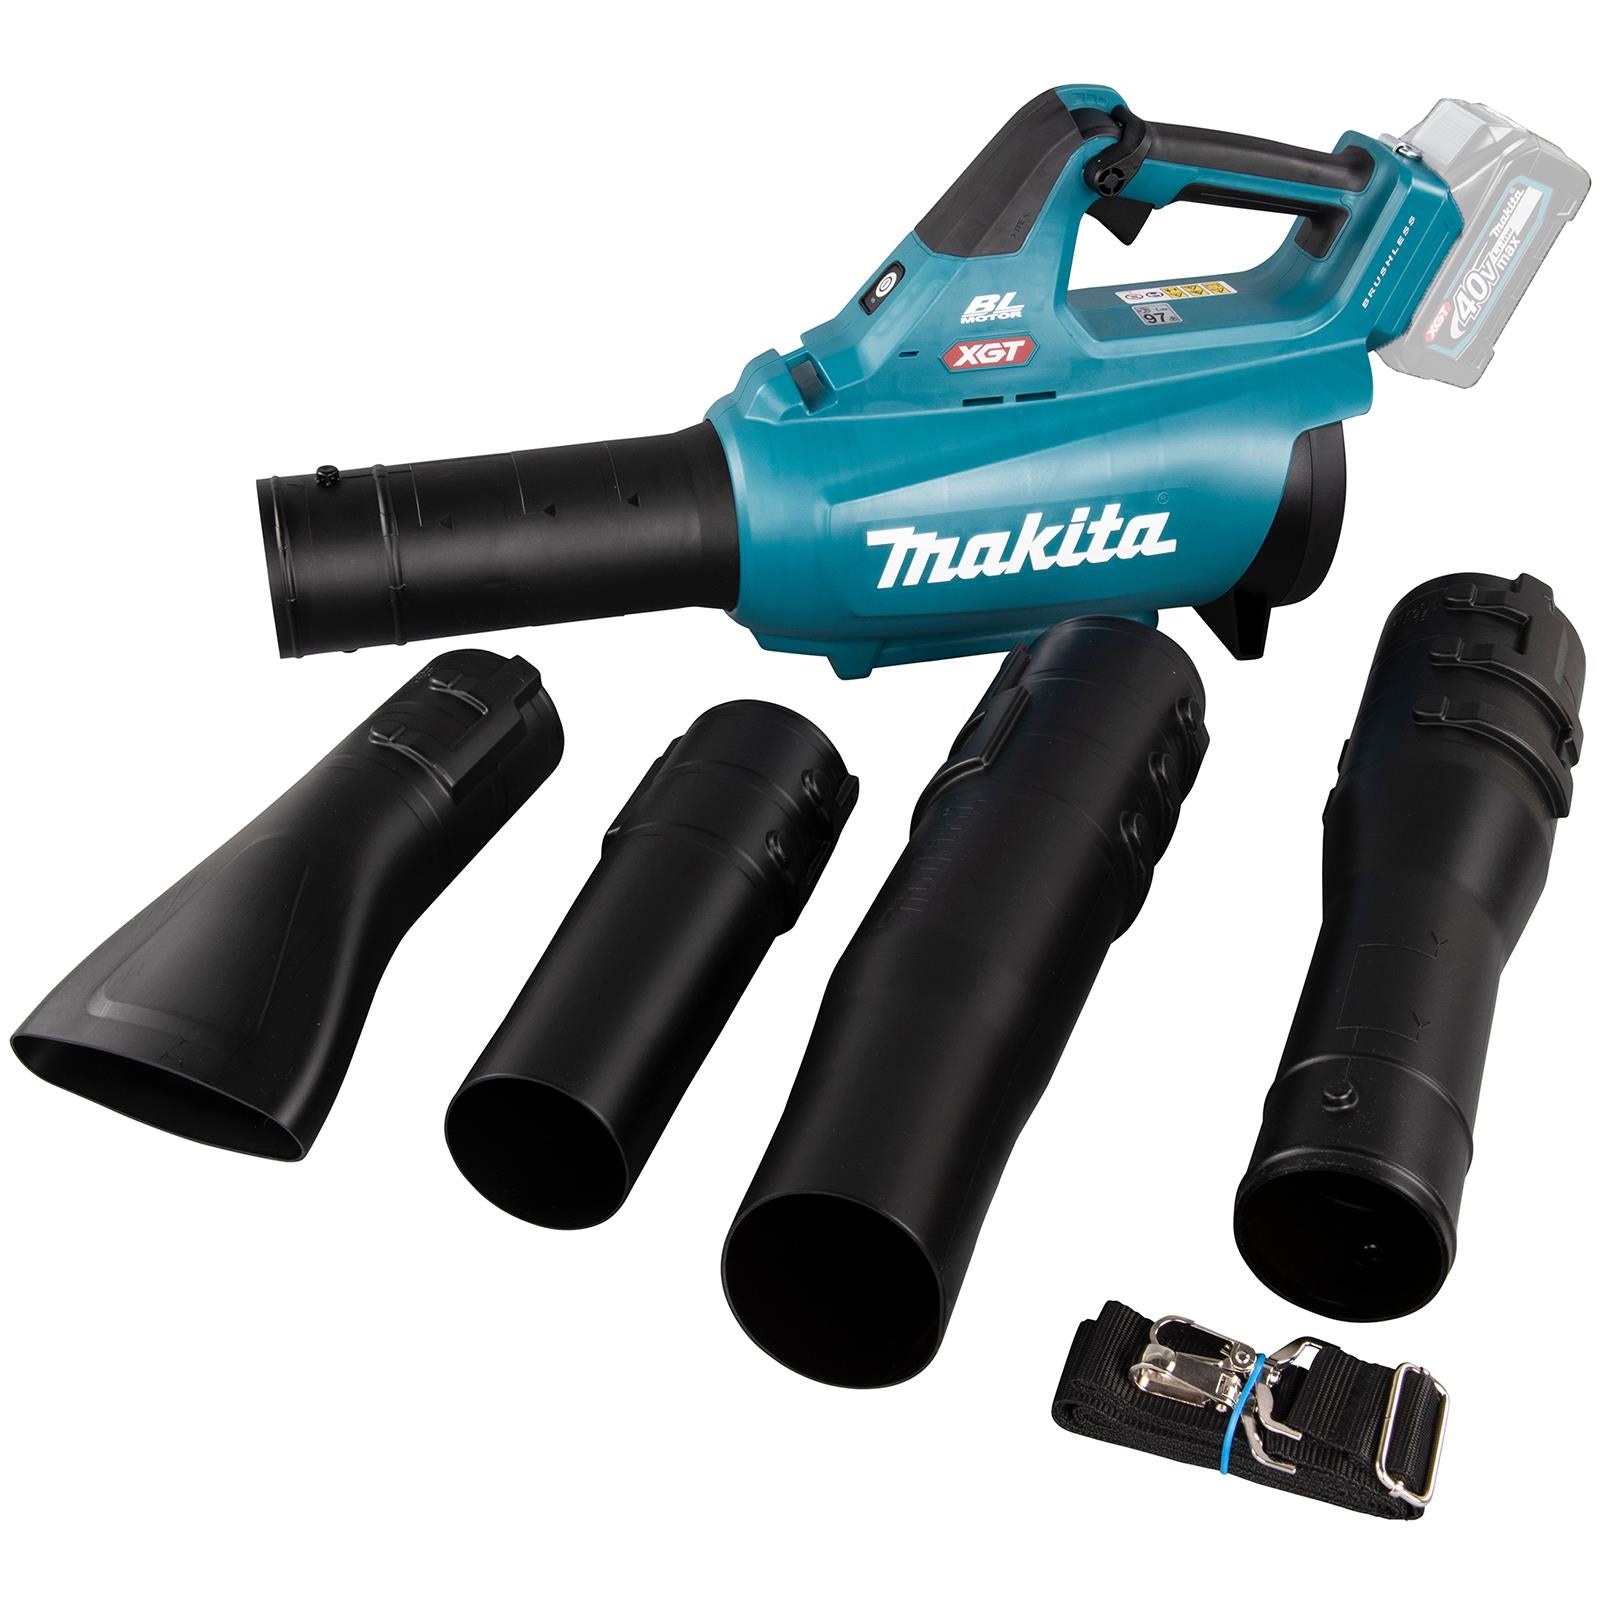 Makita Leaf Blower 40V XGT Brushless Cordless 17N Garden Grass Clippings Construction Bare Unit Body Only UB001GZ